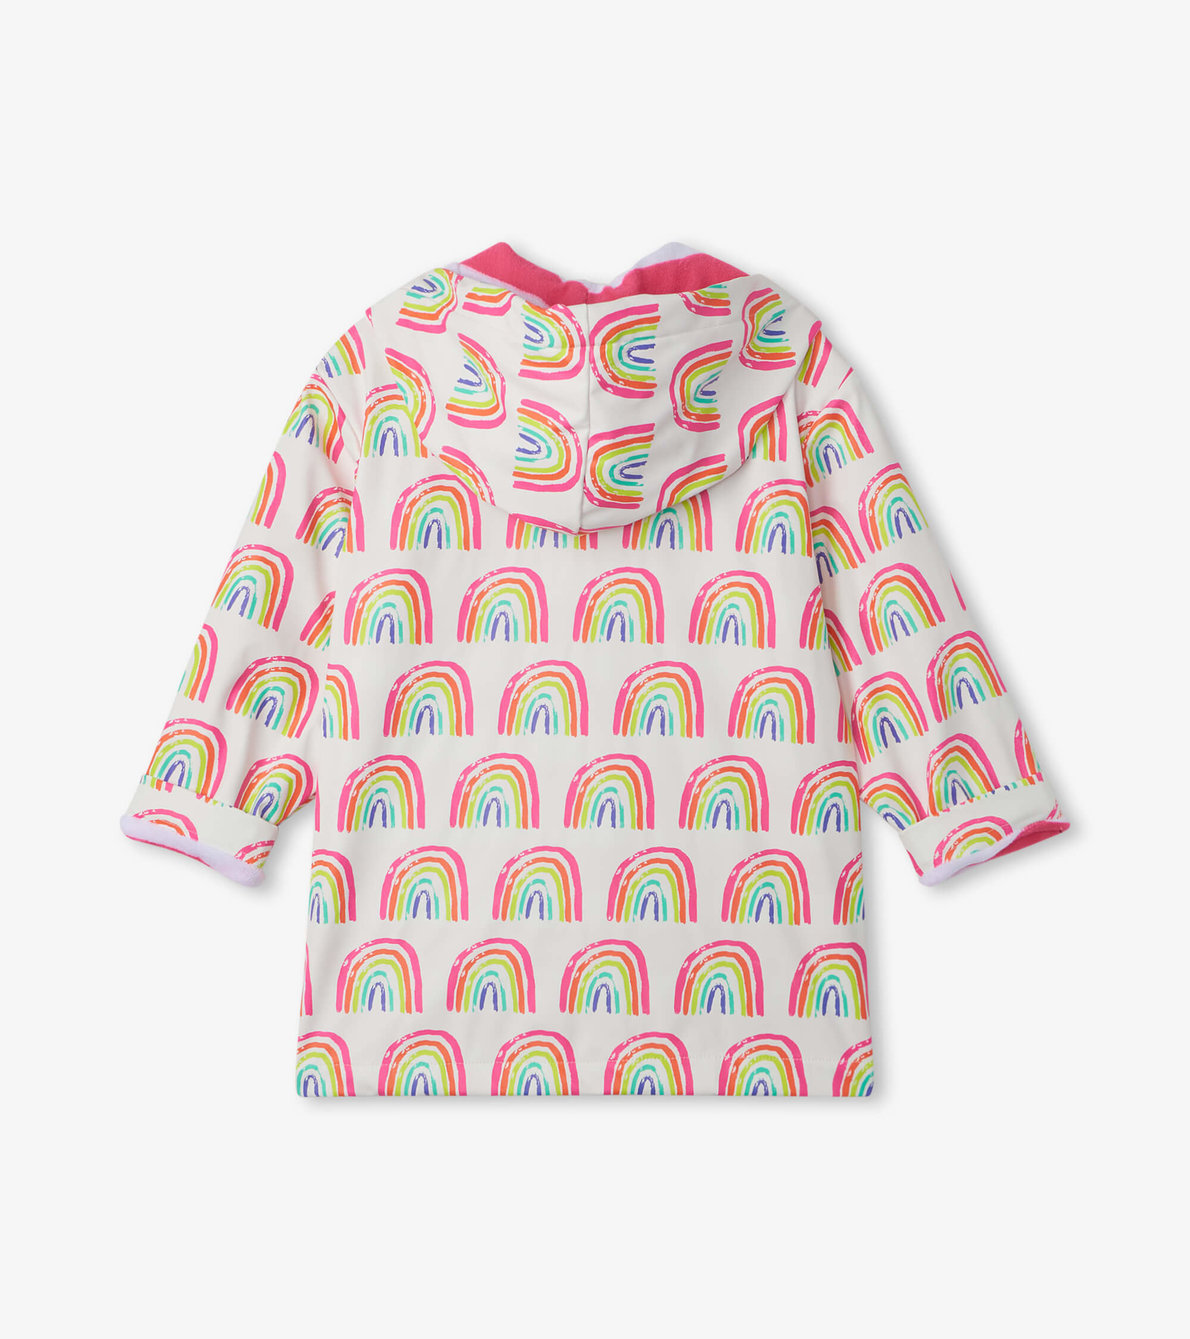 View larger image of Pretty Rainbows Raincoat